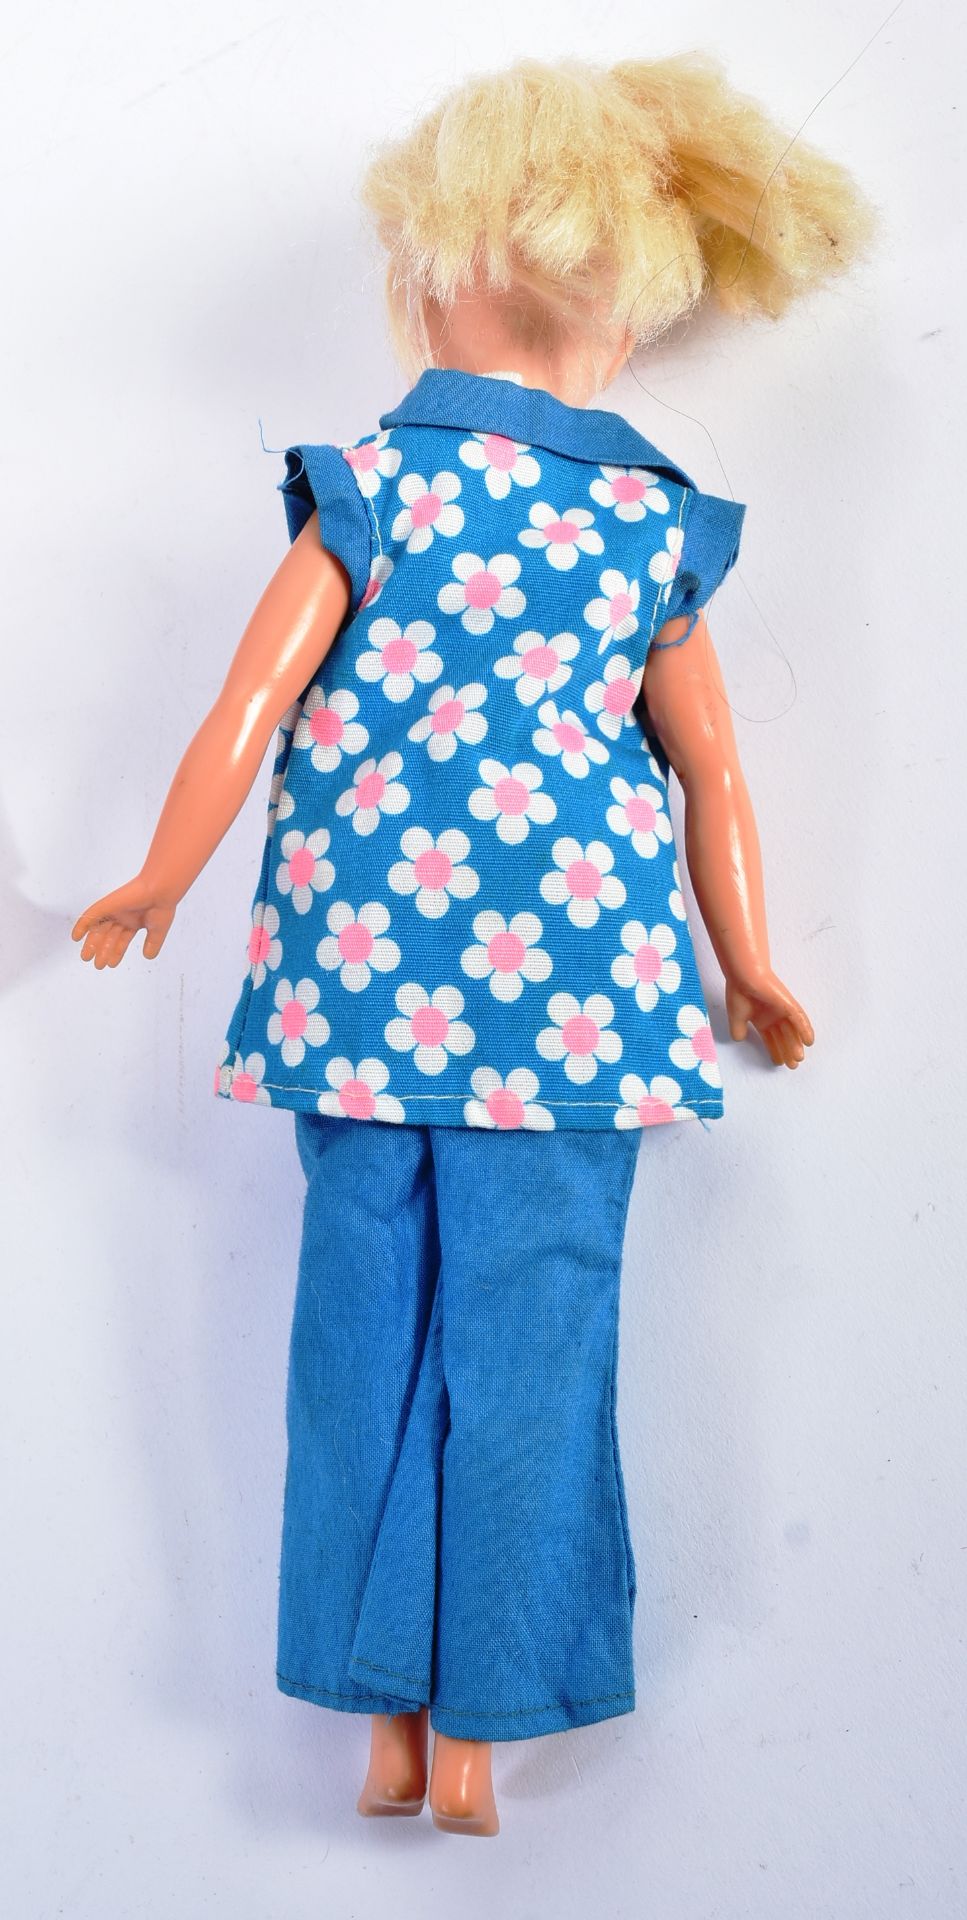 SINDY - COLLECTION OF VINTAGE PEDIGREE DOLLS & CLOTHING - Image 5 of 9